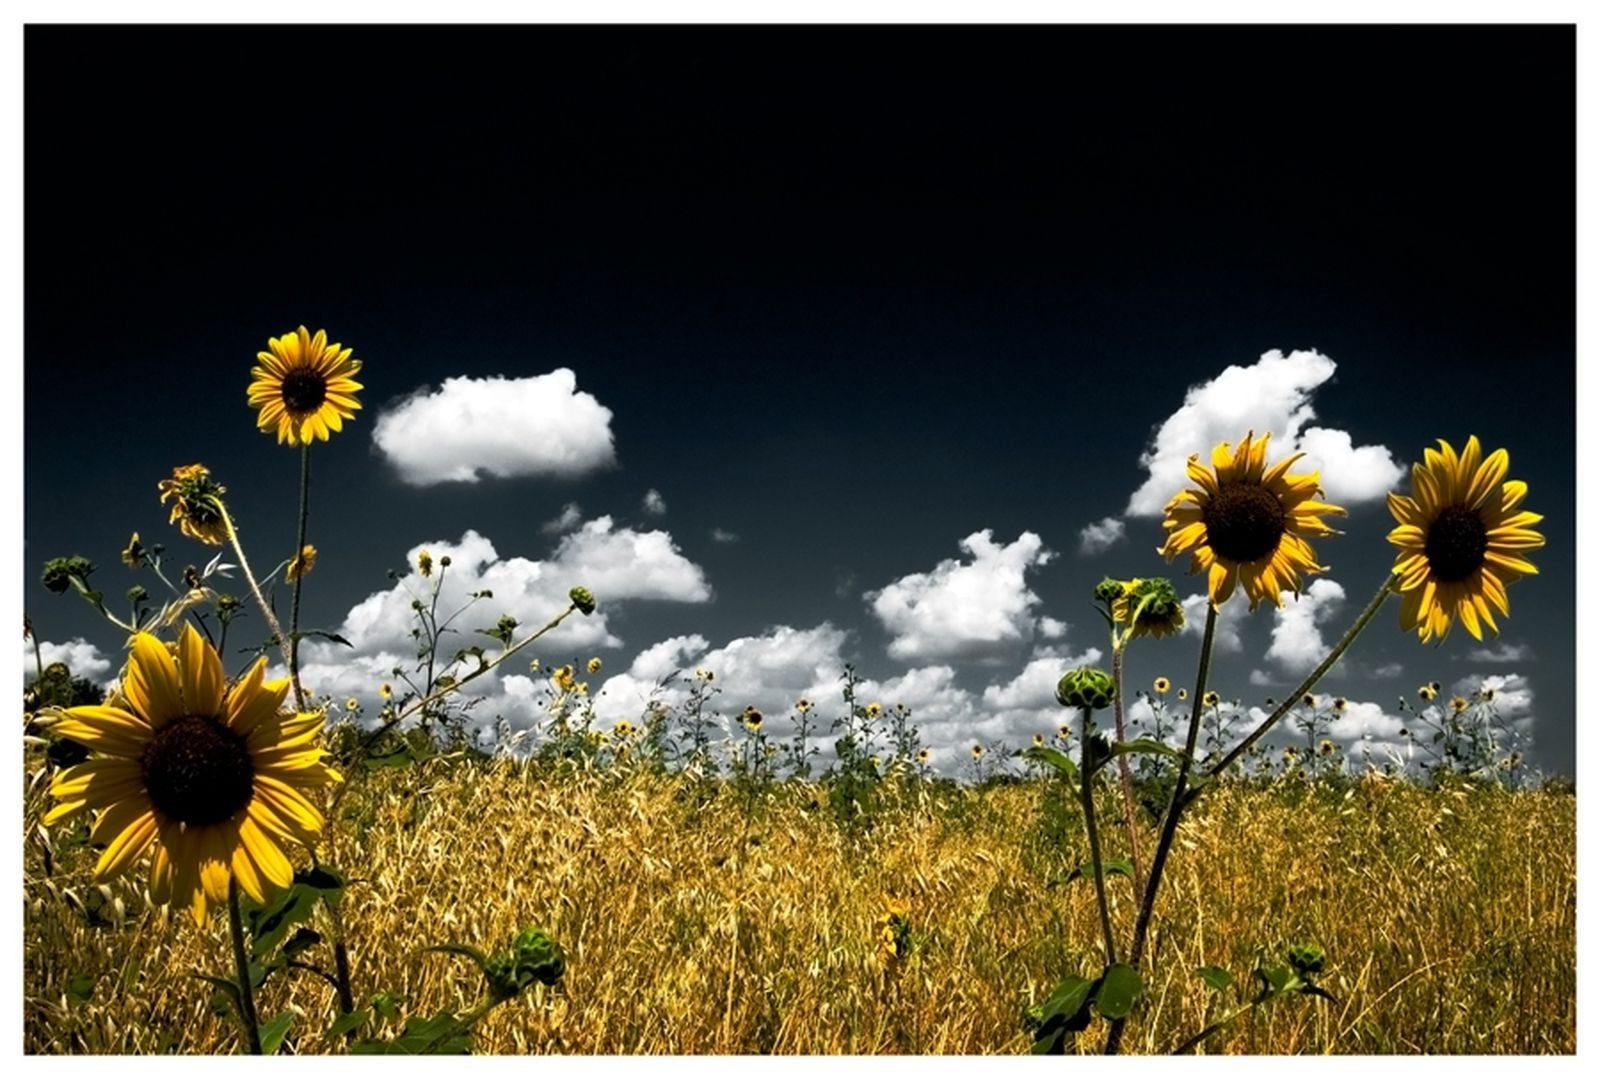 fields meadows and valleys flower field nature flora sunflower summer sun rural bright color fair weather growth country sky floral sunny hayfield garden landscape beautiful